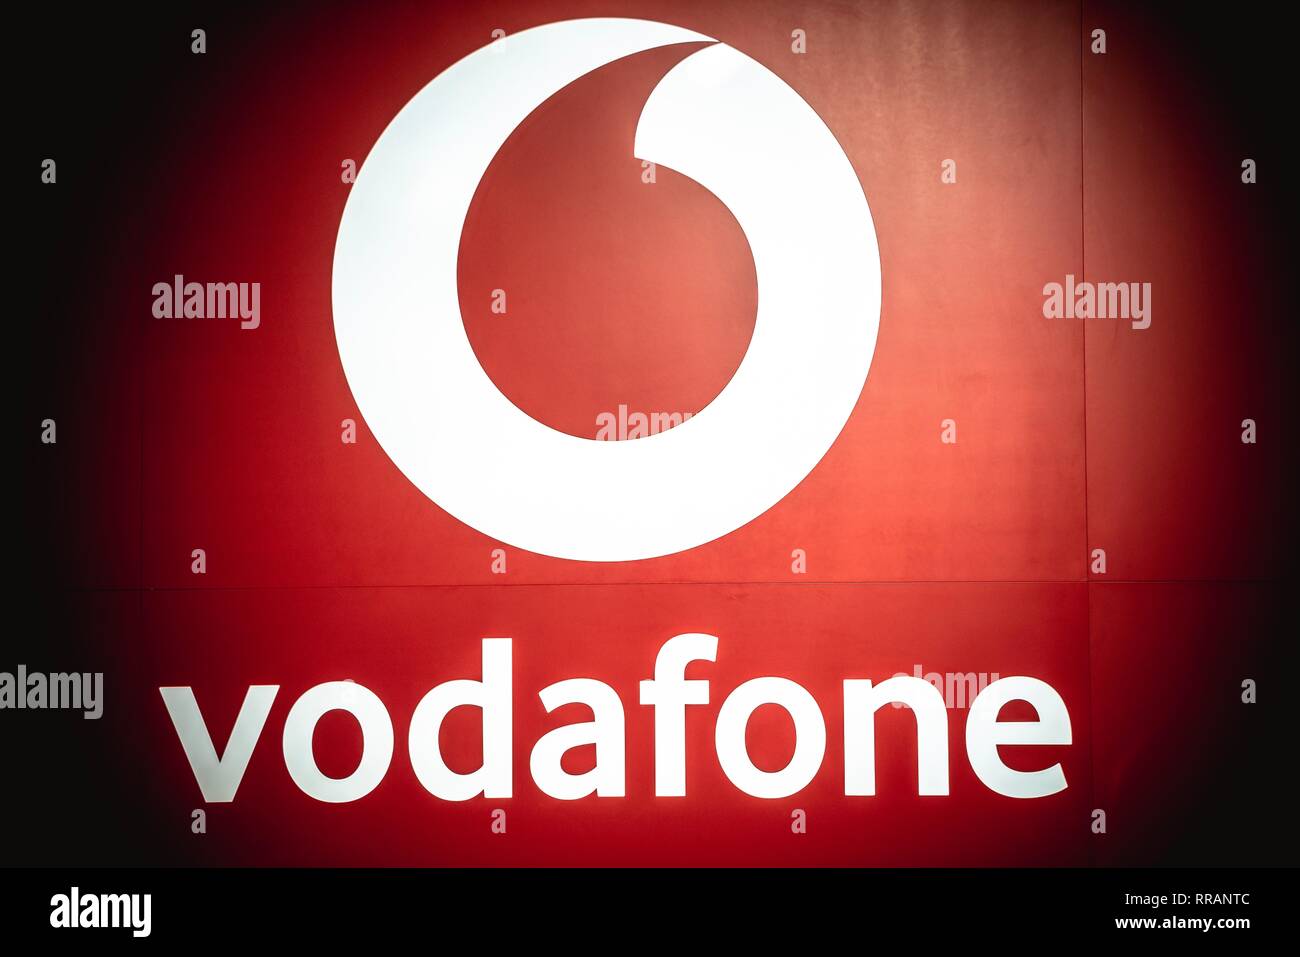 Telefonica has approached Vodafone on Spanish broadband deal, Bloomberg  reports | Reuters